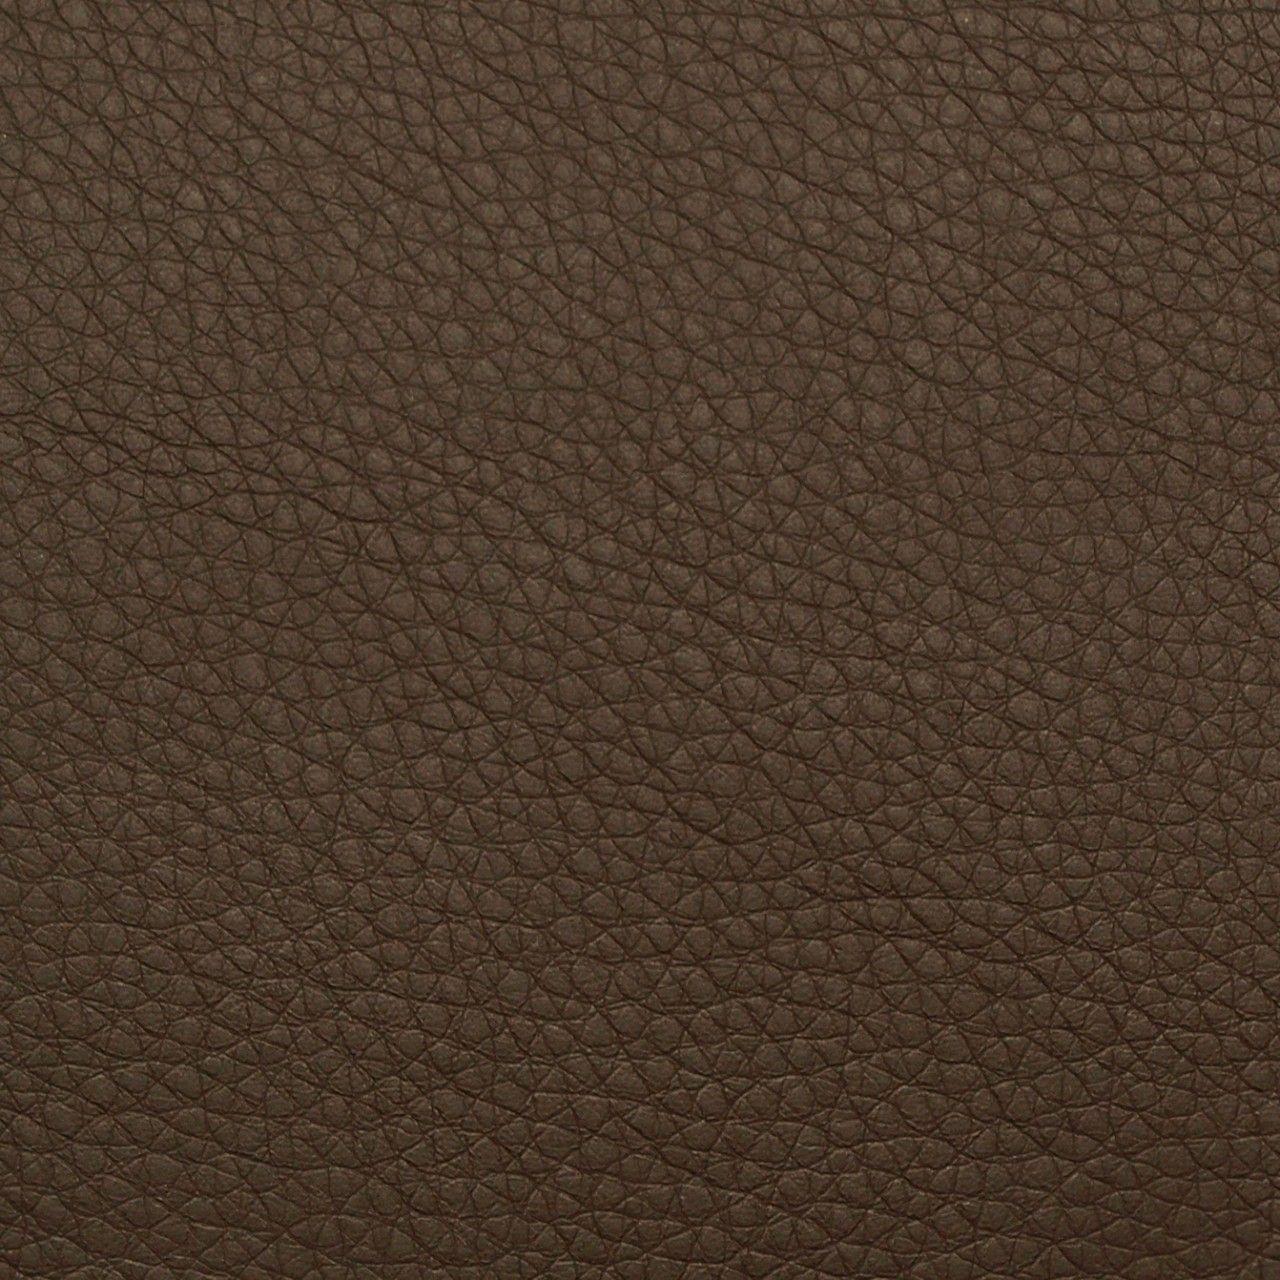 Leather Background HD Wallpaper 16364